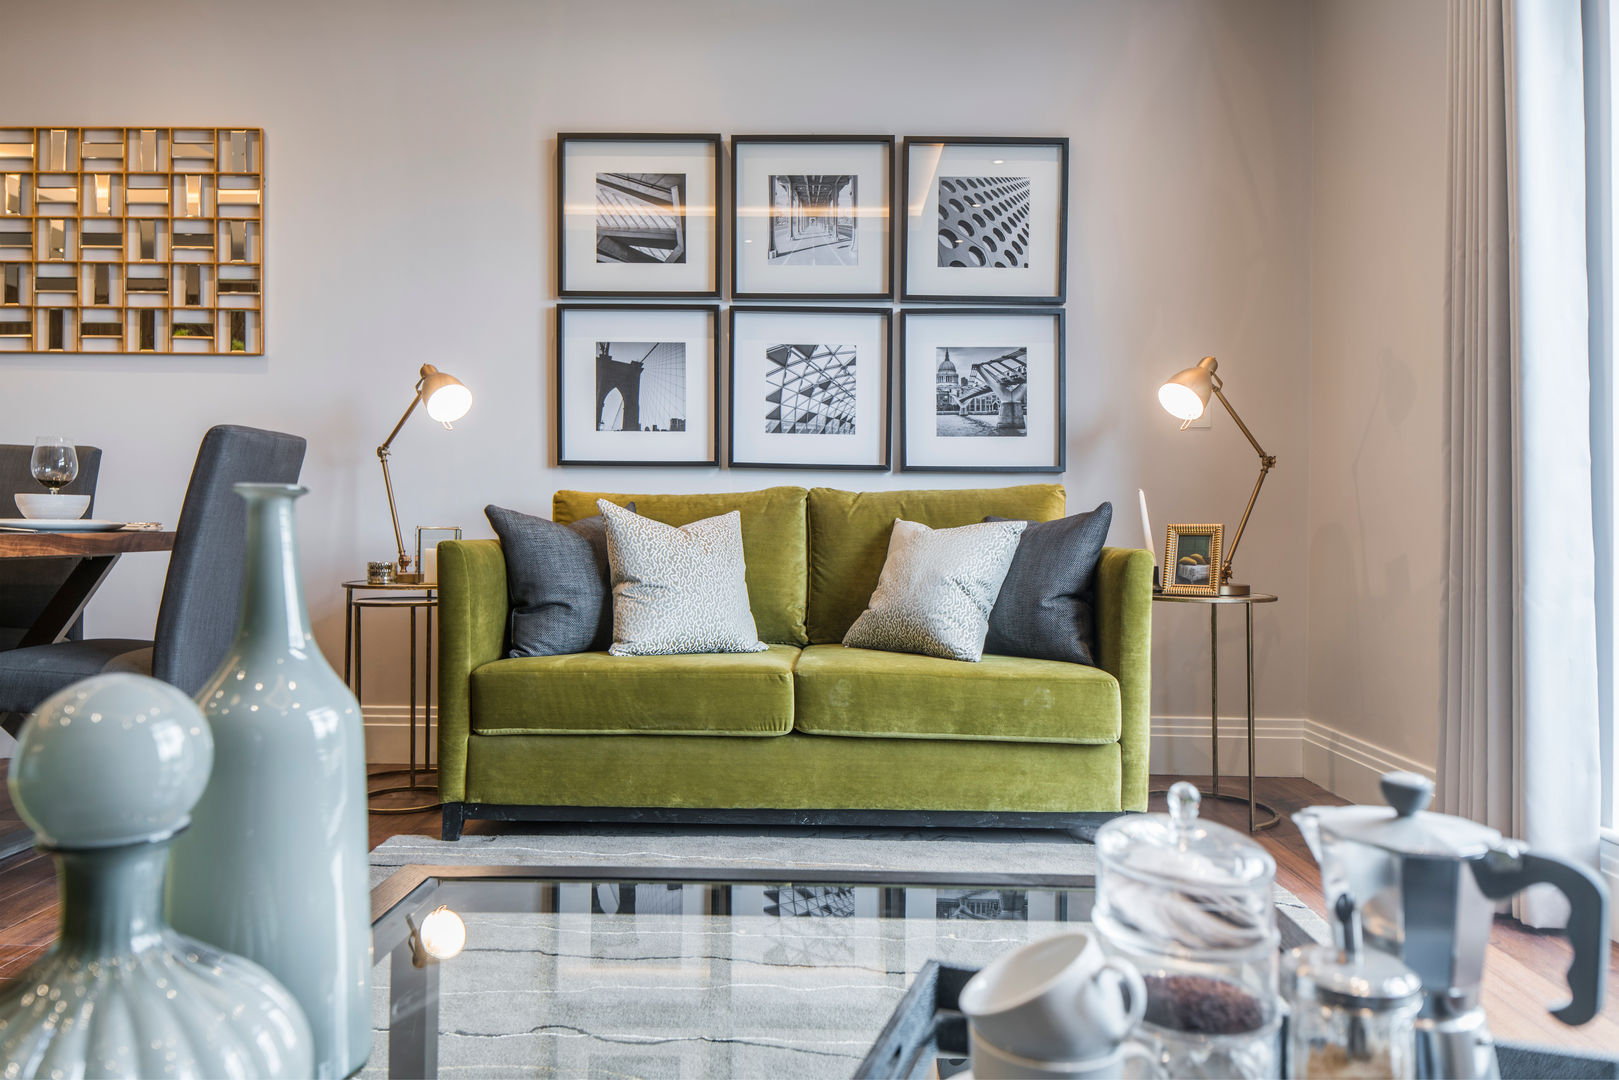 Musewll Hill, London Jigsaw Interior Architecture & Design Salones eclécticos Cobre/Bronce/Latón green sofa,velvet,luxury,london,jigsaw interiors,modern,copper,picture wall,open-plan